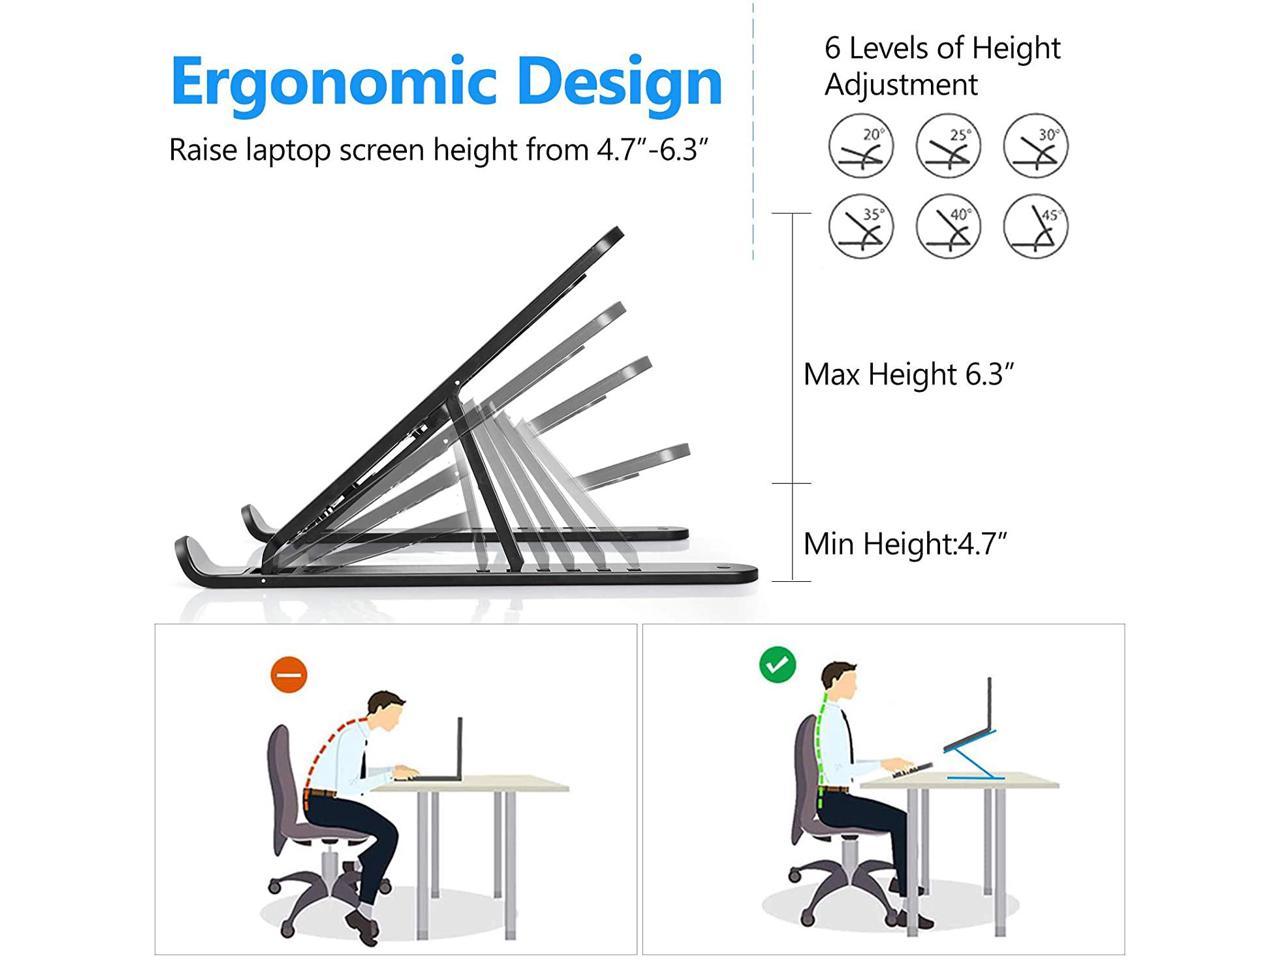 Suitable for All Laptops and Tablets ABS 6-Level Angle Adjustable Height Laptop Mount Foldable Portable Desktop Computer Laptop Stand Laptop Stand 